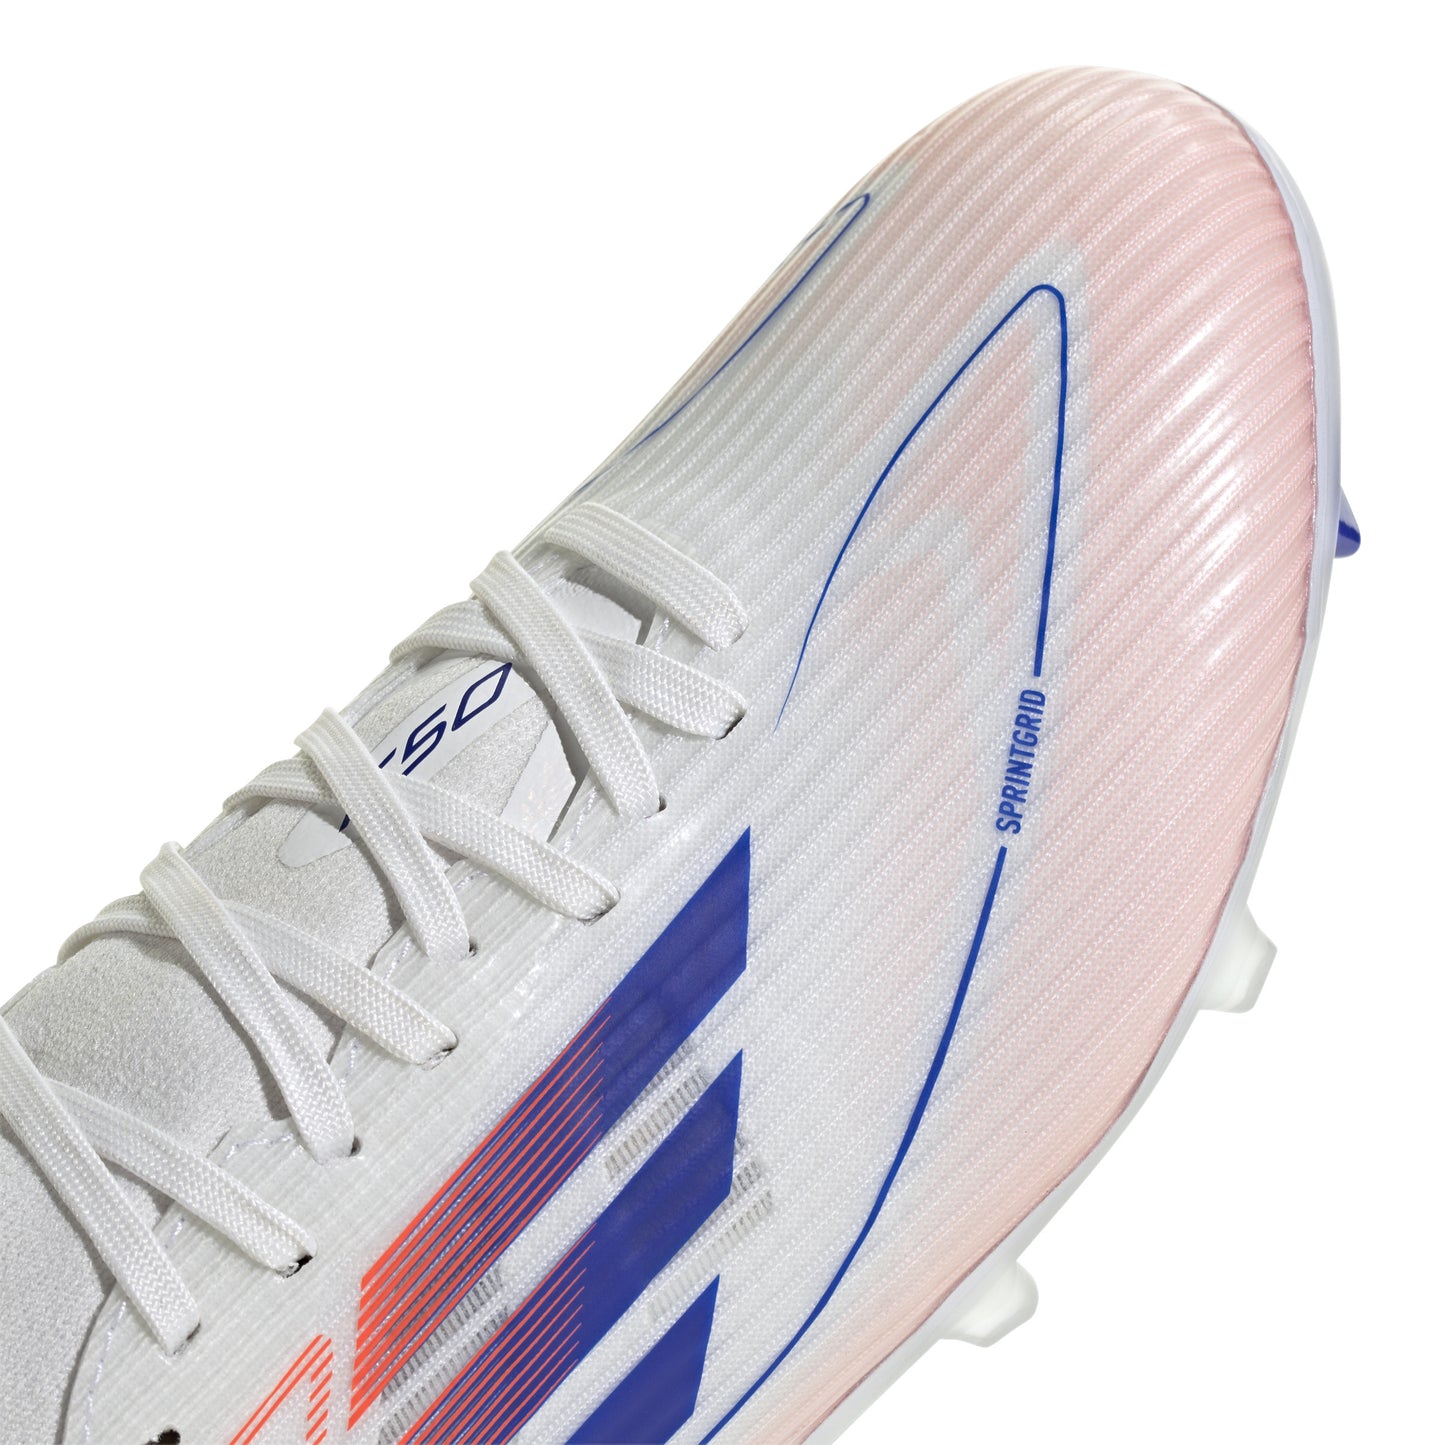 Adidas F50 League Mid-Cut Firm/Multi-Ground Boots